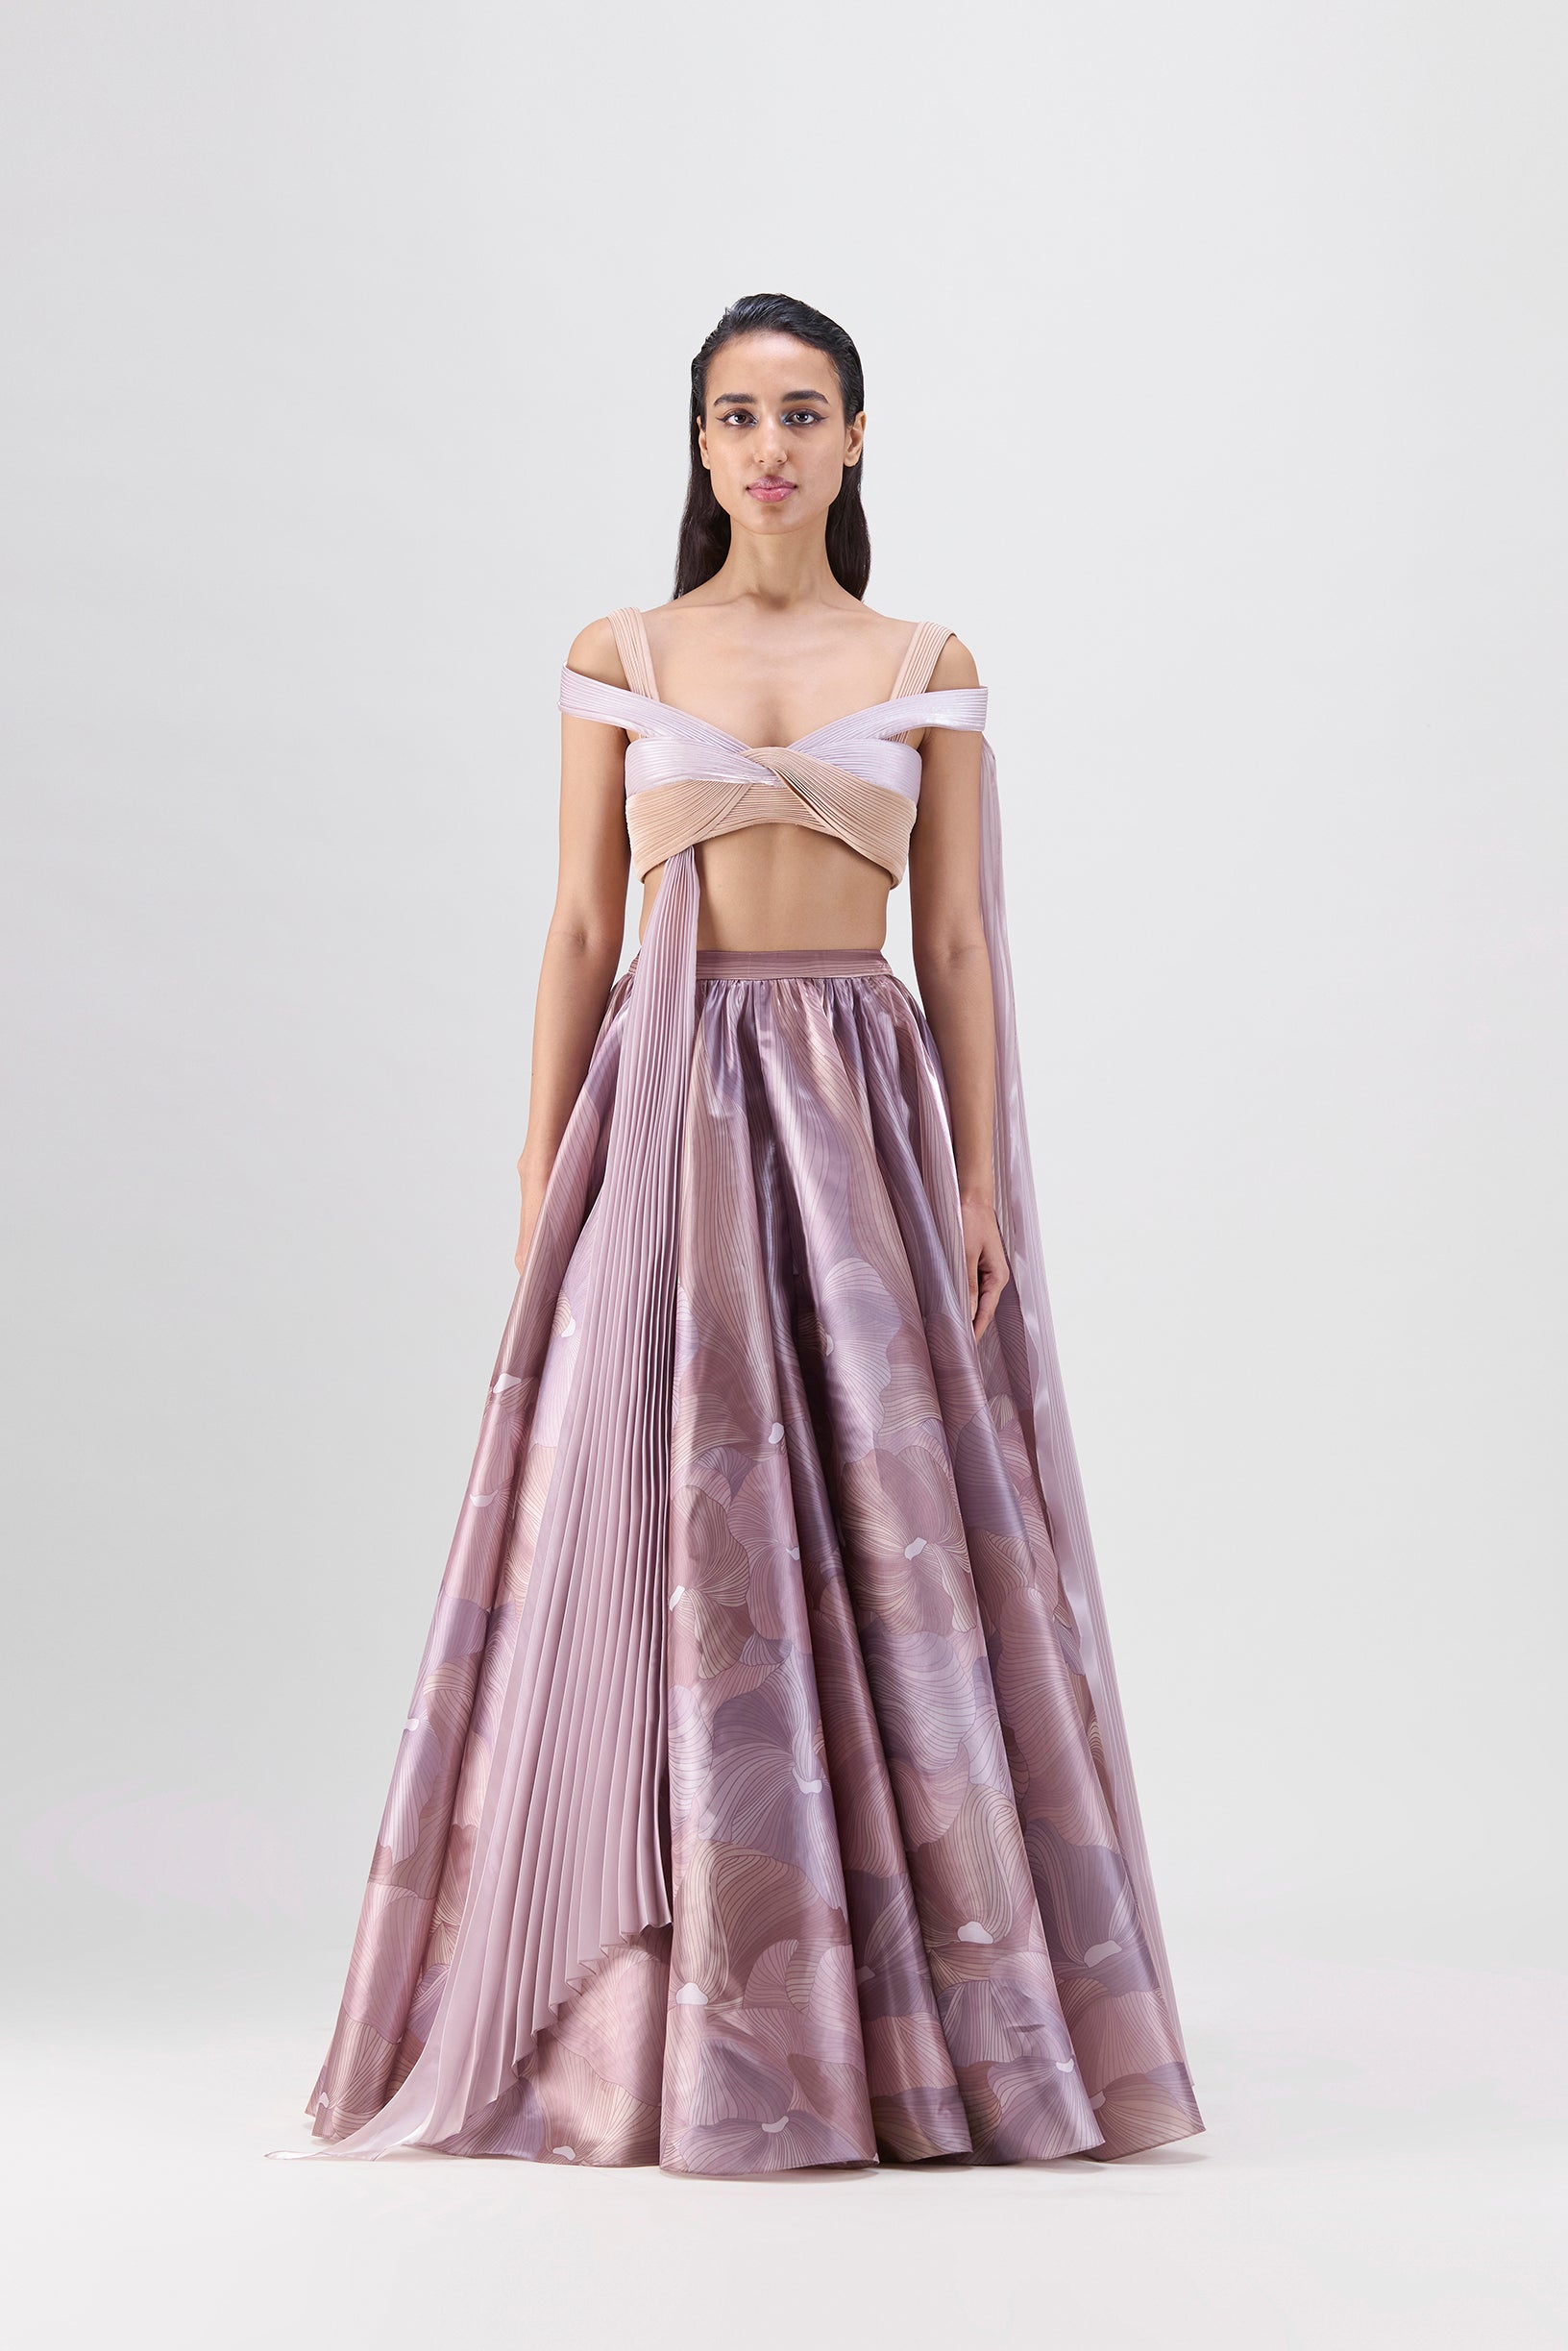 STRUCTURED TOP AND PRINTED SKIRT IN GLAZED ORGANZA